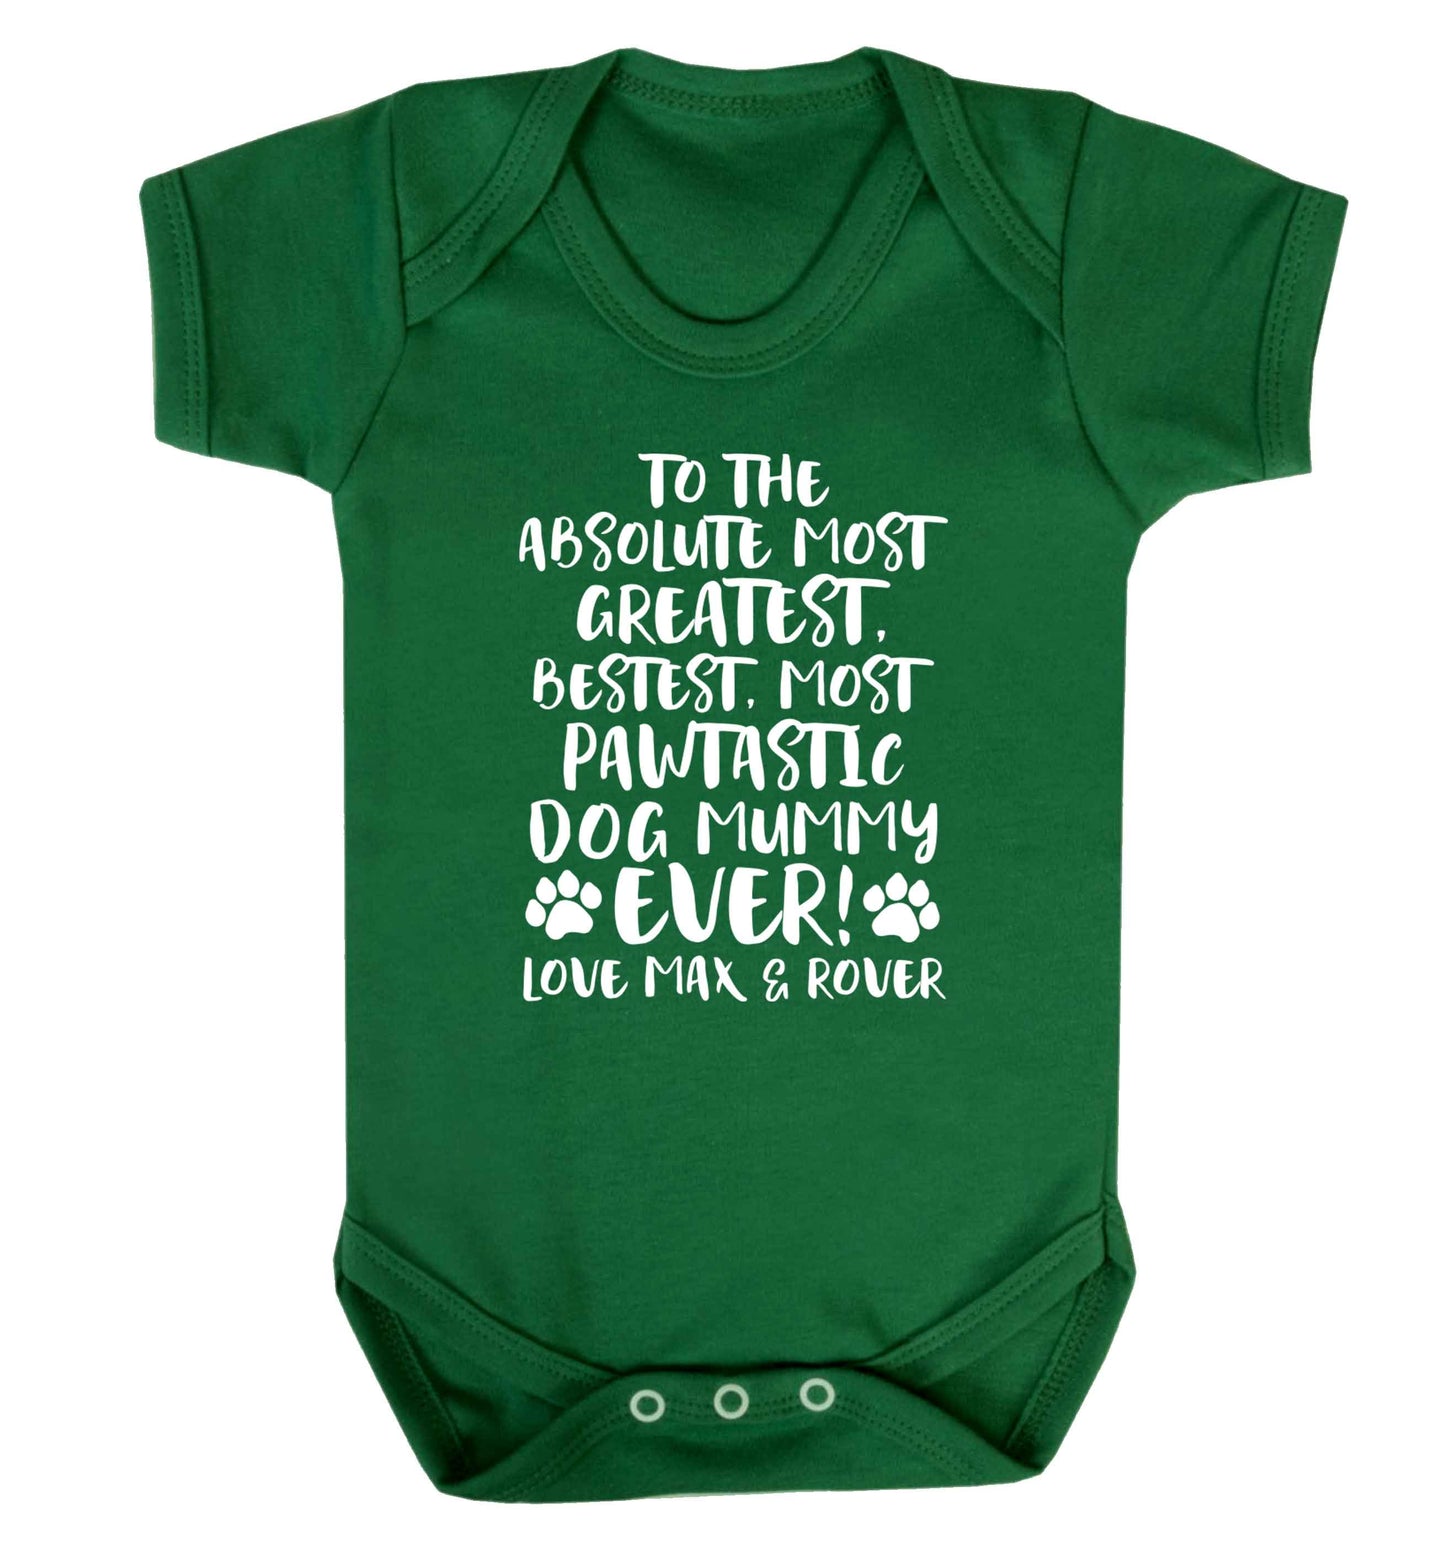 Personalsied to the most pawtastic dog mummy ever Baby Vest green 18-24 months